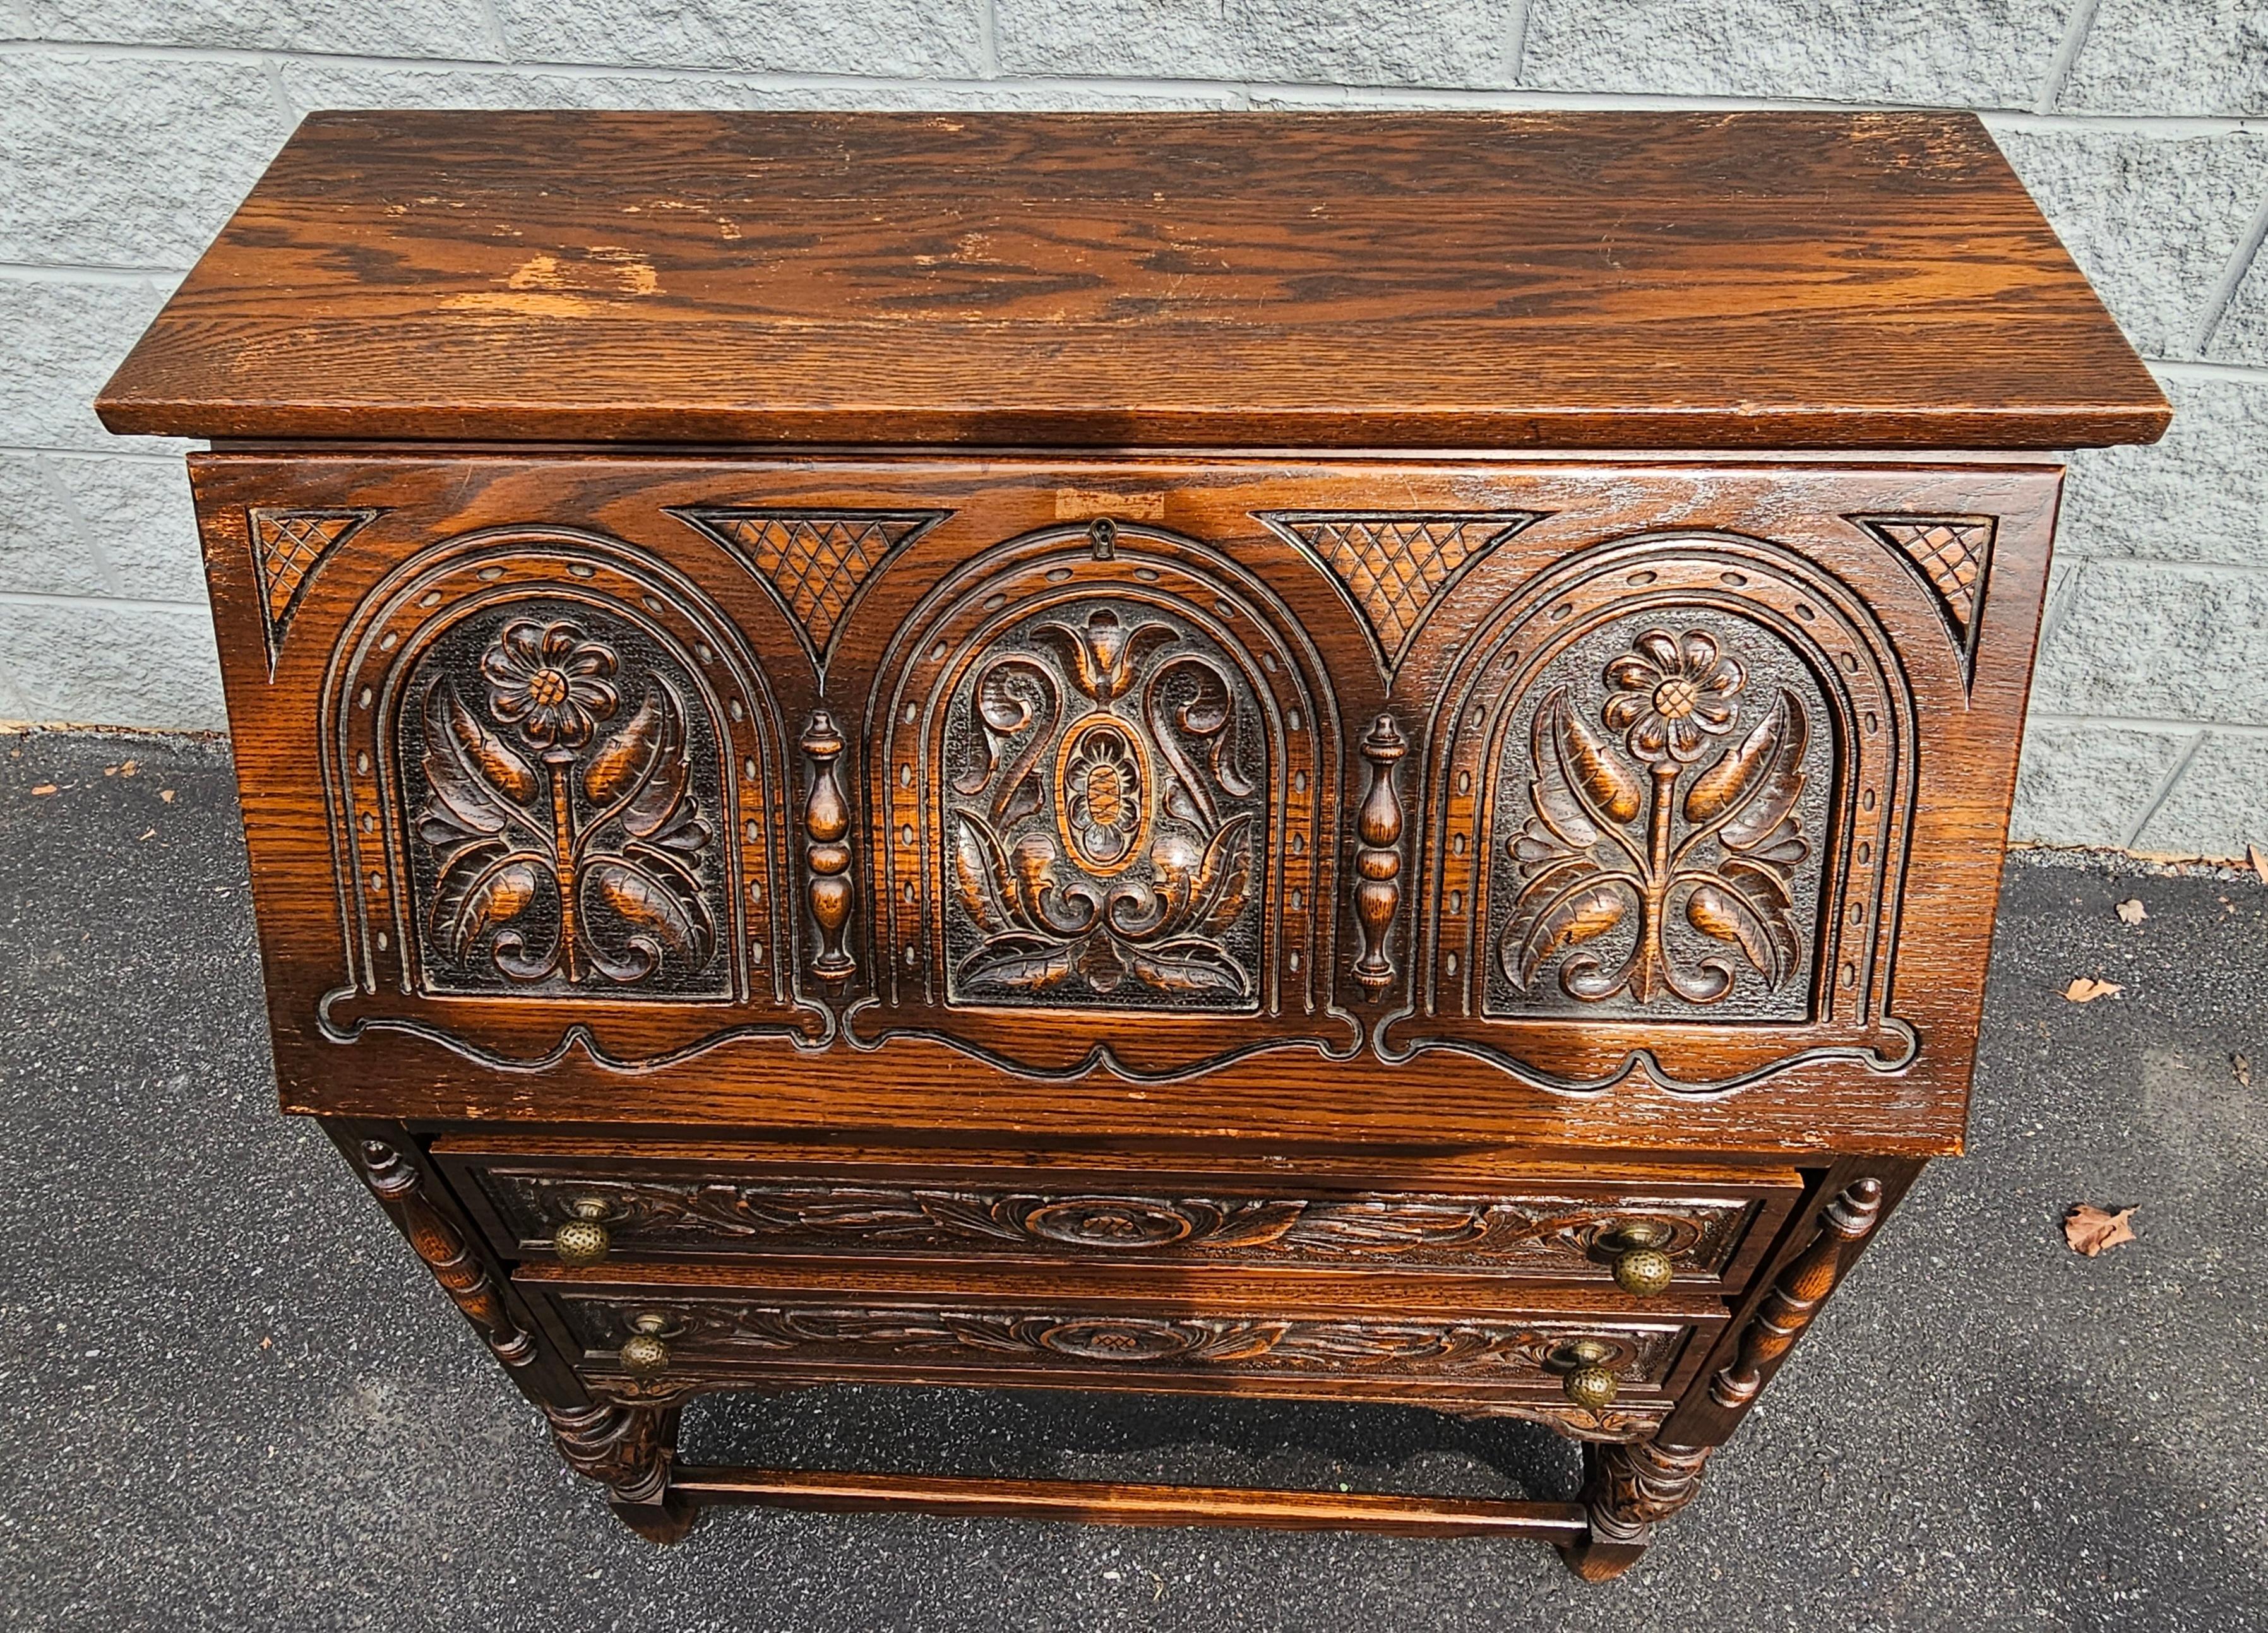 1930s Rockford Furniture Jacobean Style Handcrafted Secretary Desk For Sale 1